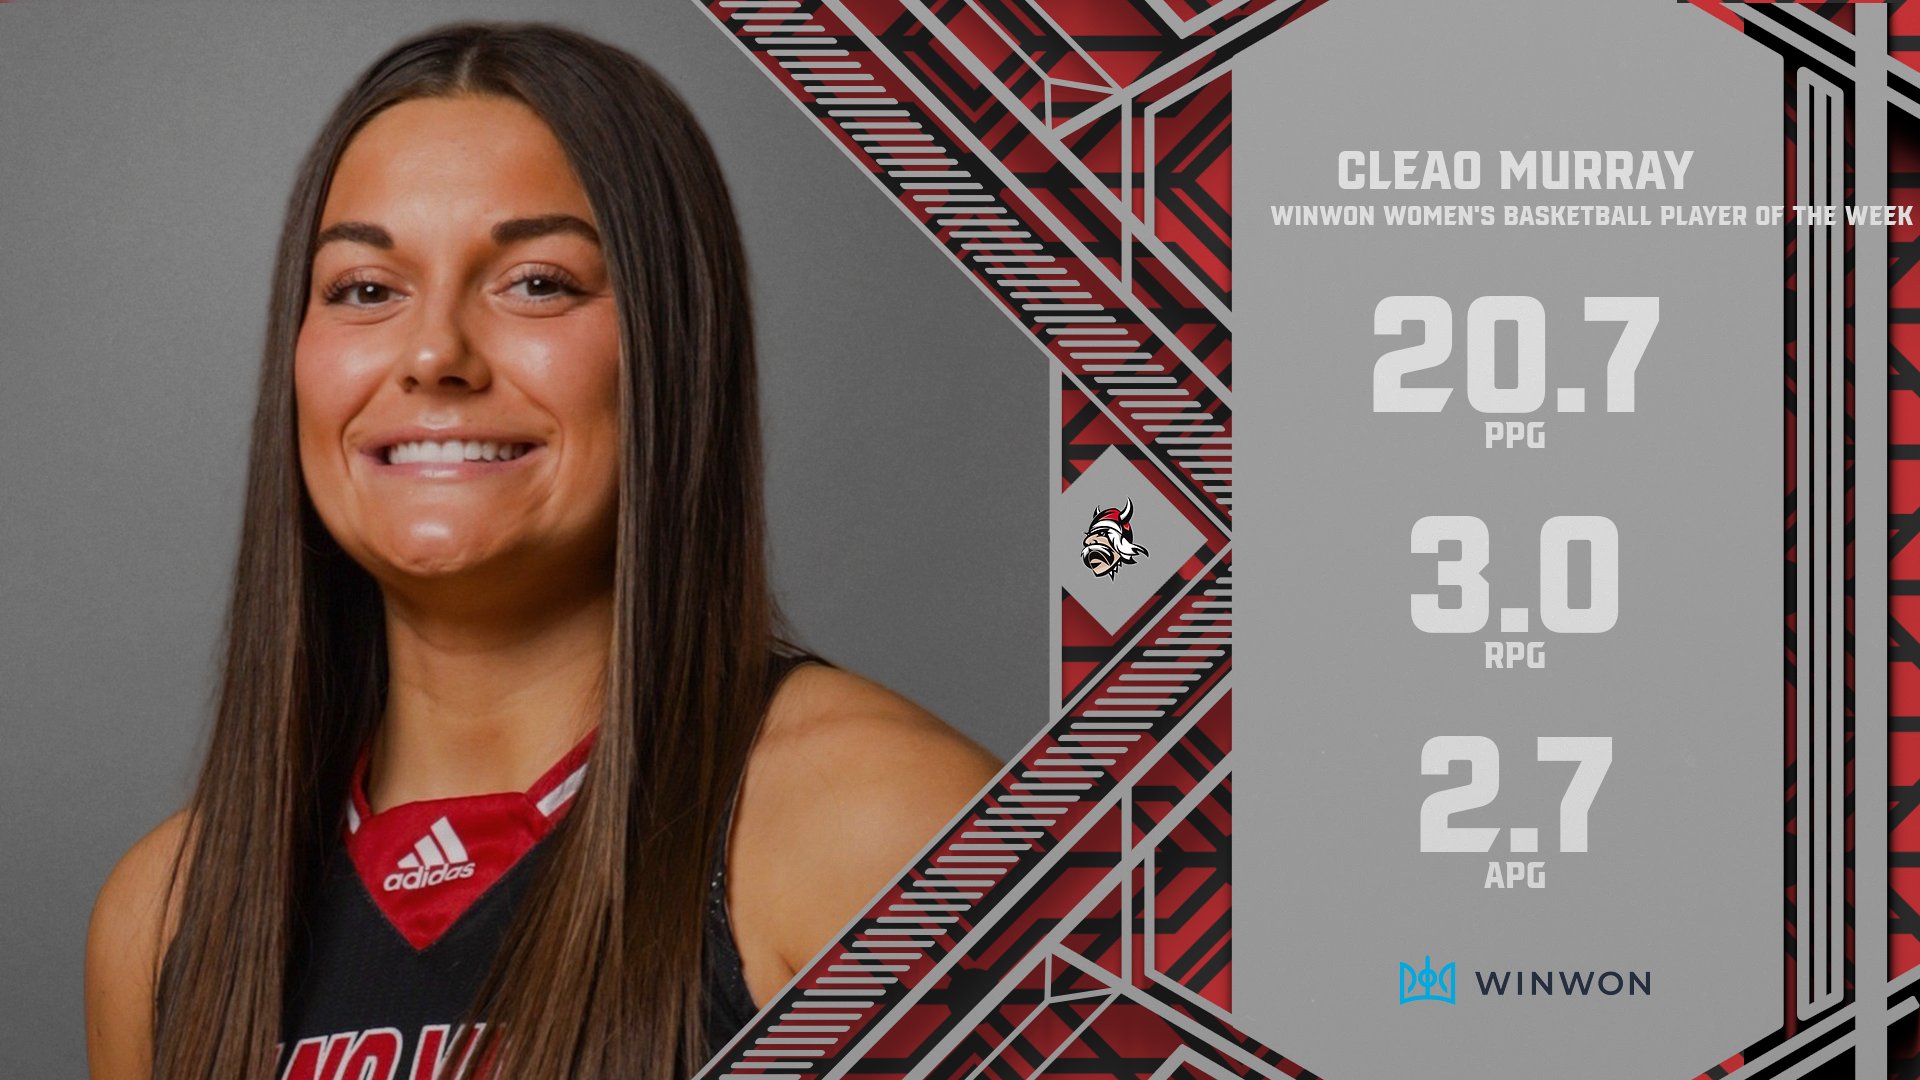 Cleao Murray of No. 18 Ranked Grand View Selected WinWon Women’s Basketball Player of the Week